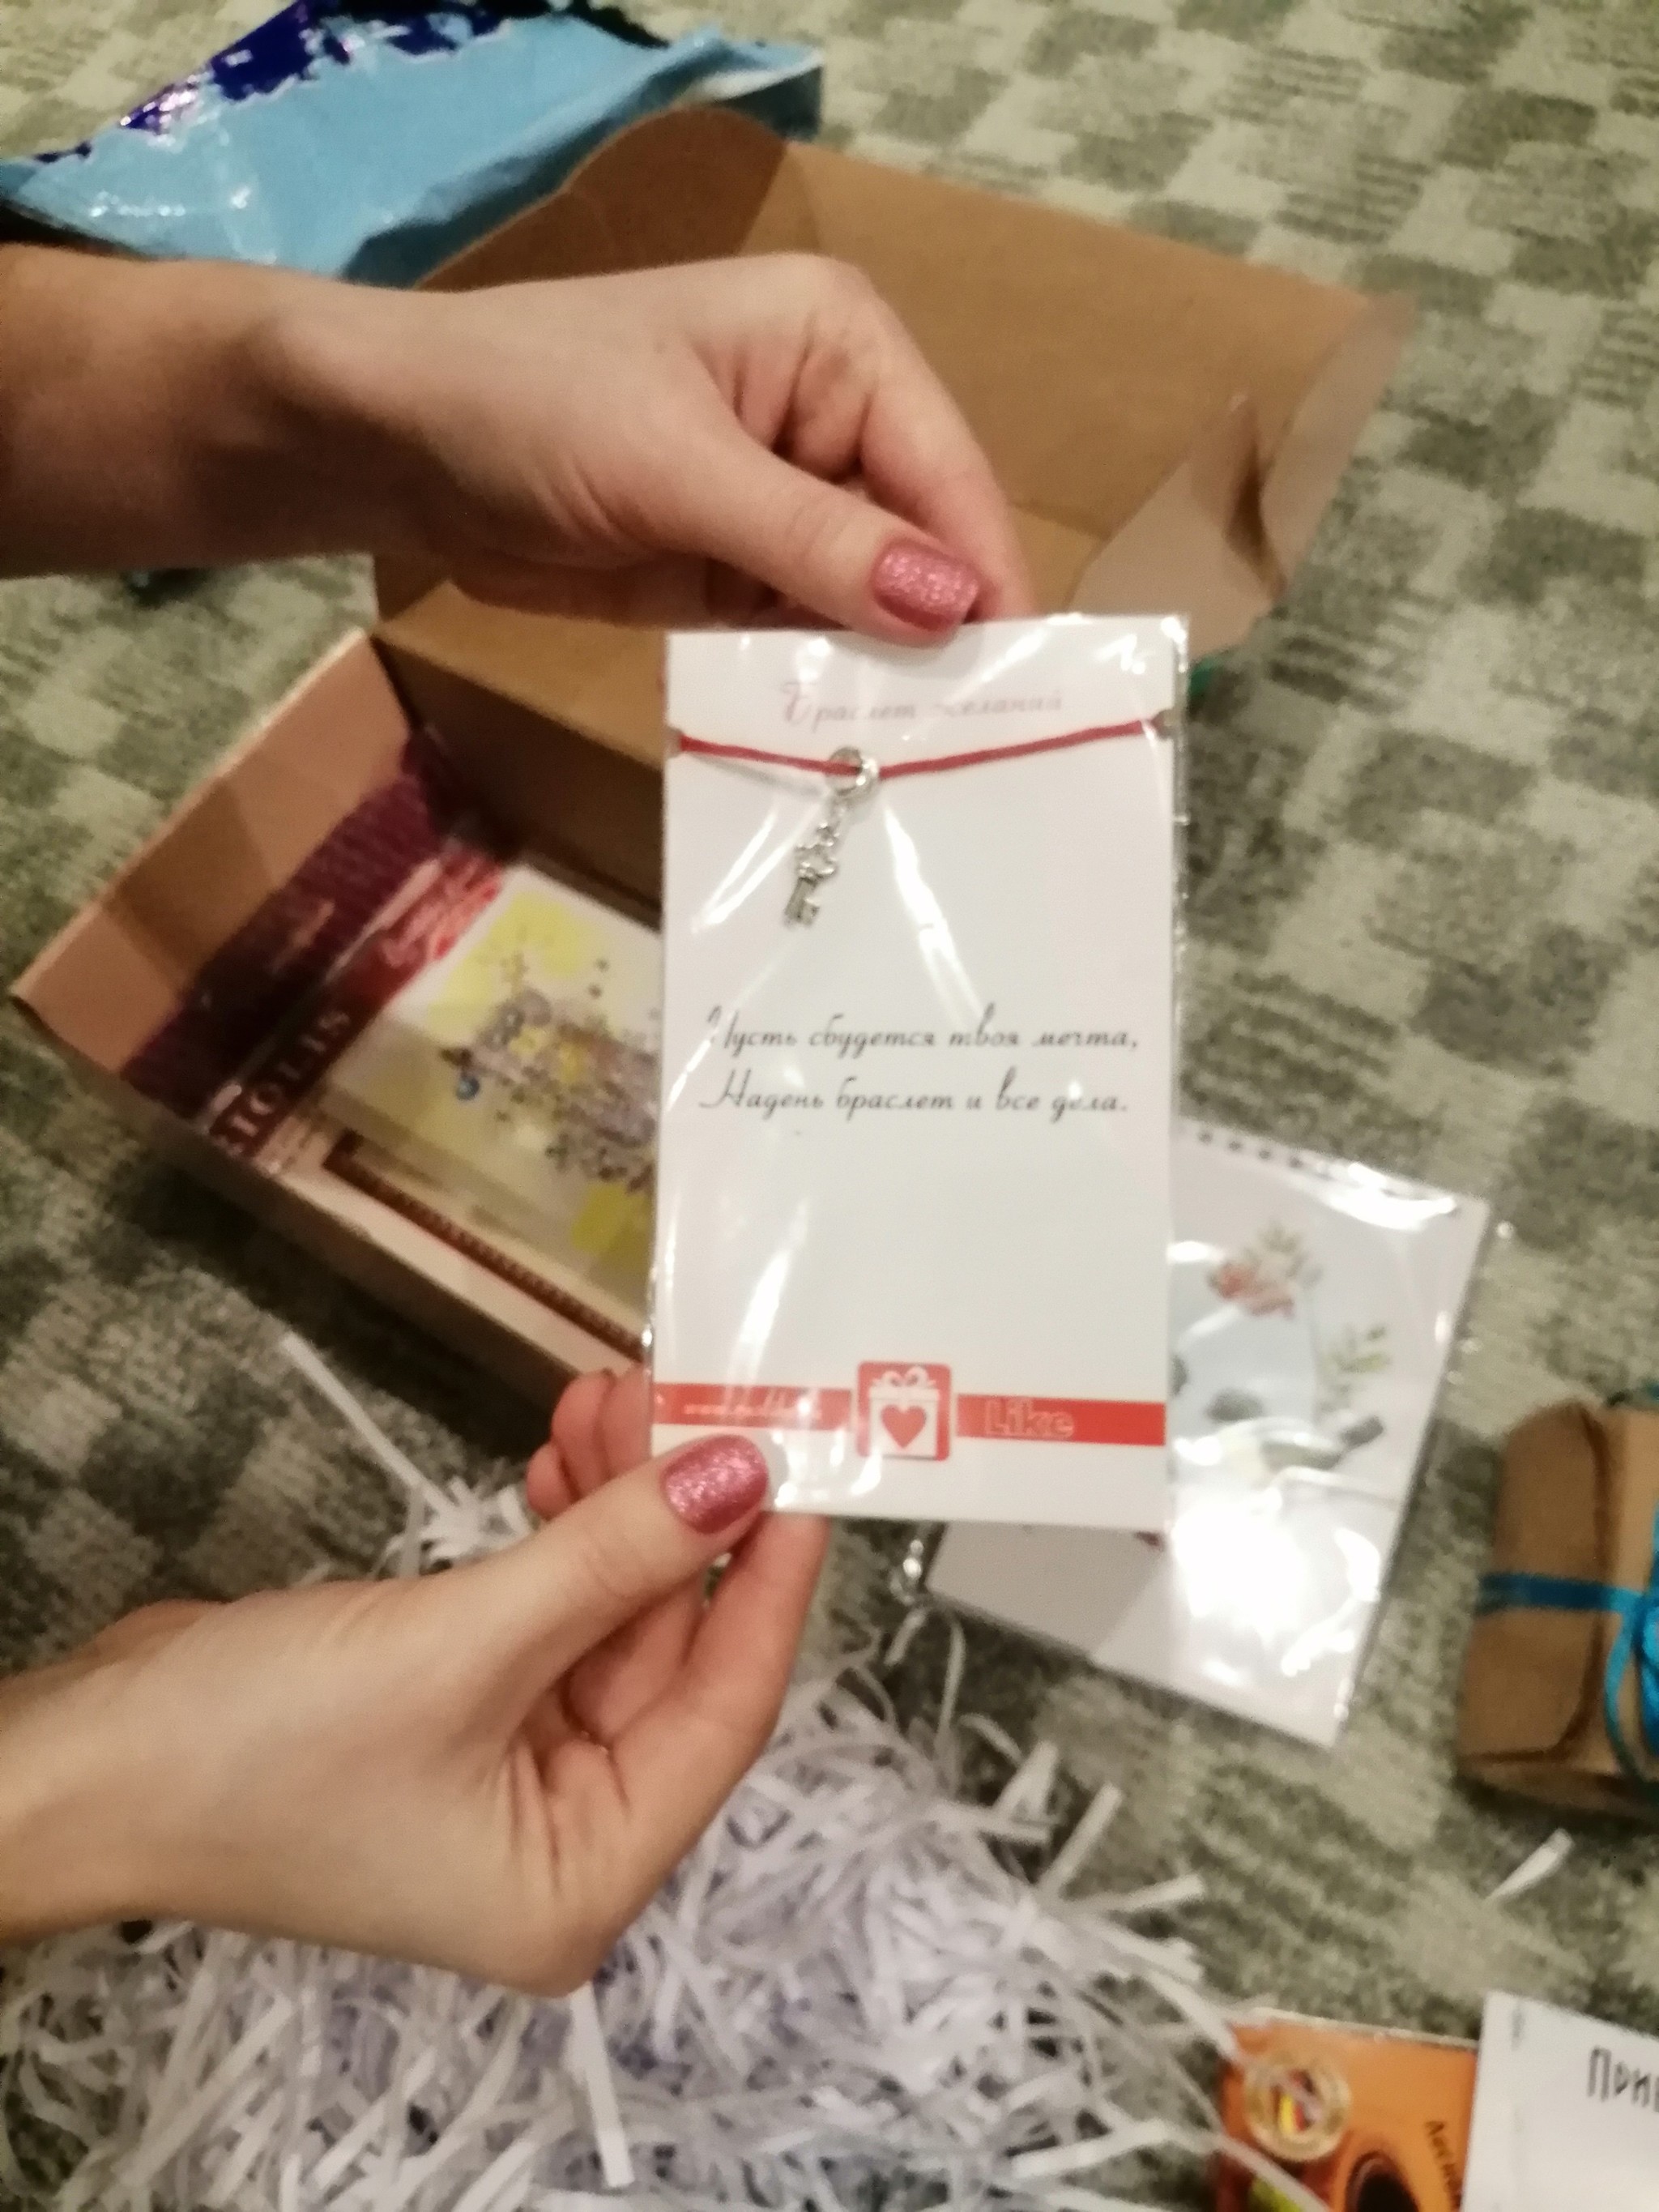 ADM 2019-2020. Omsk-Shchelkovo, coincidences are not accidental - My, New Year's gift exchange, Gift exchange report, Omsk, Schelkovo, Longpost, Gift exchange, Secret Santa